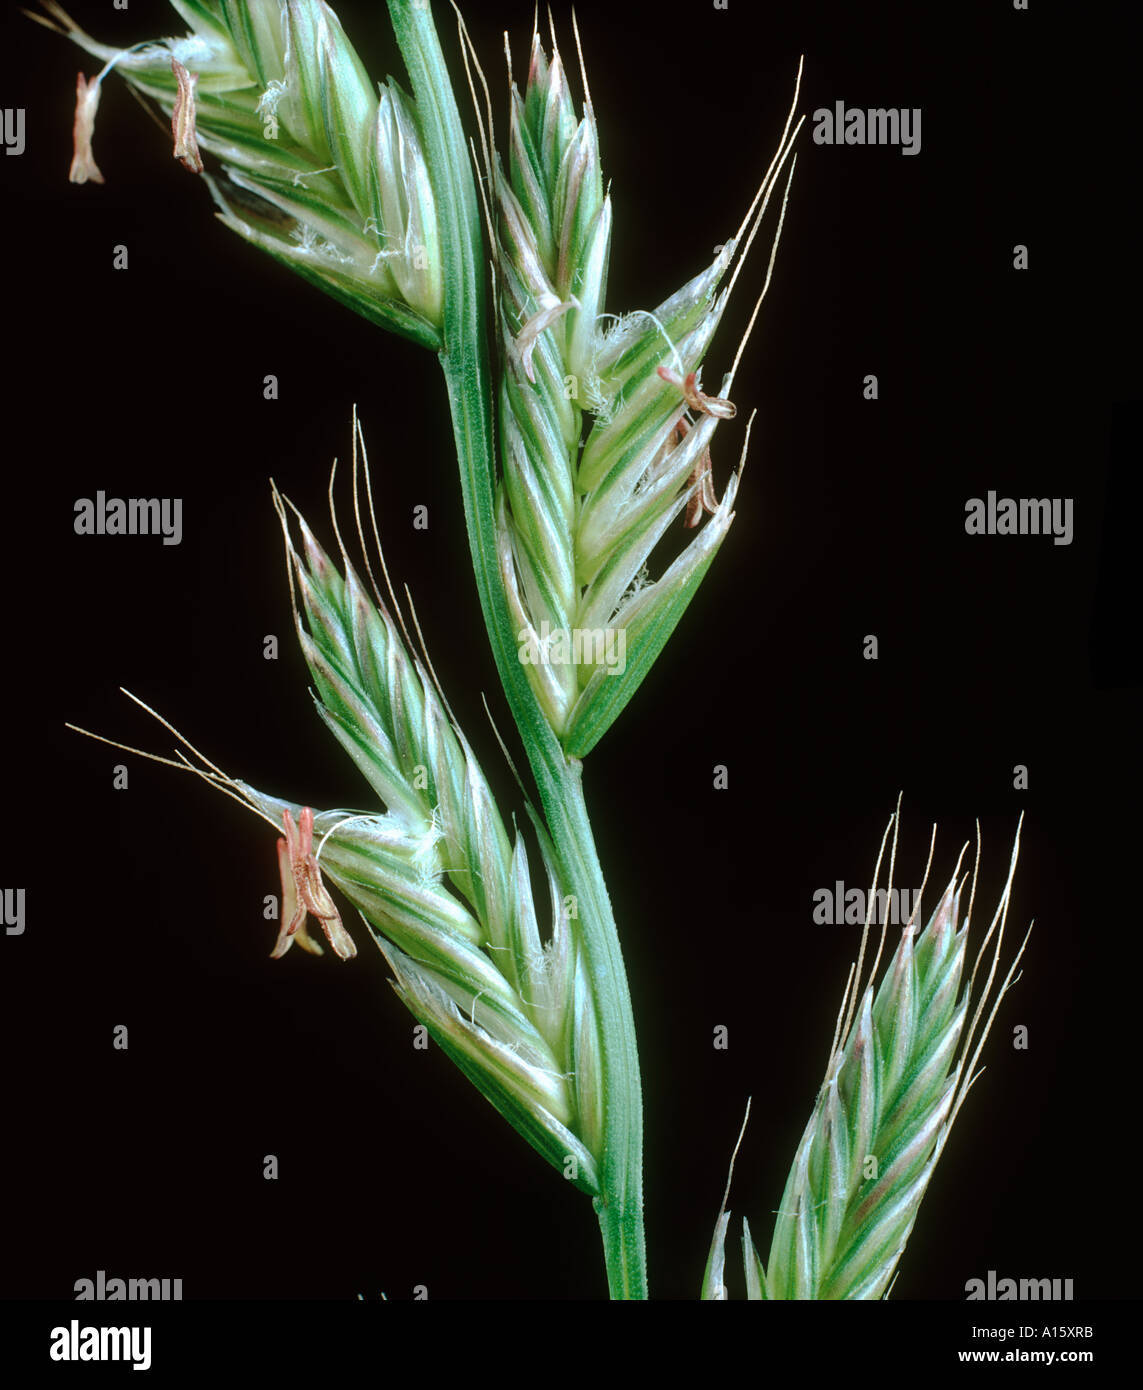 Close up on perennial ryegrass Lolium perenne flower spike to show florets Stock Photo